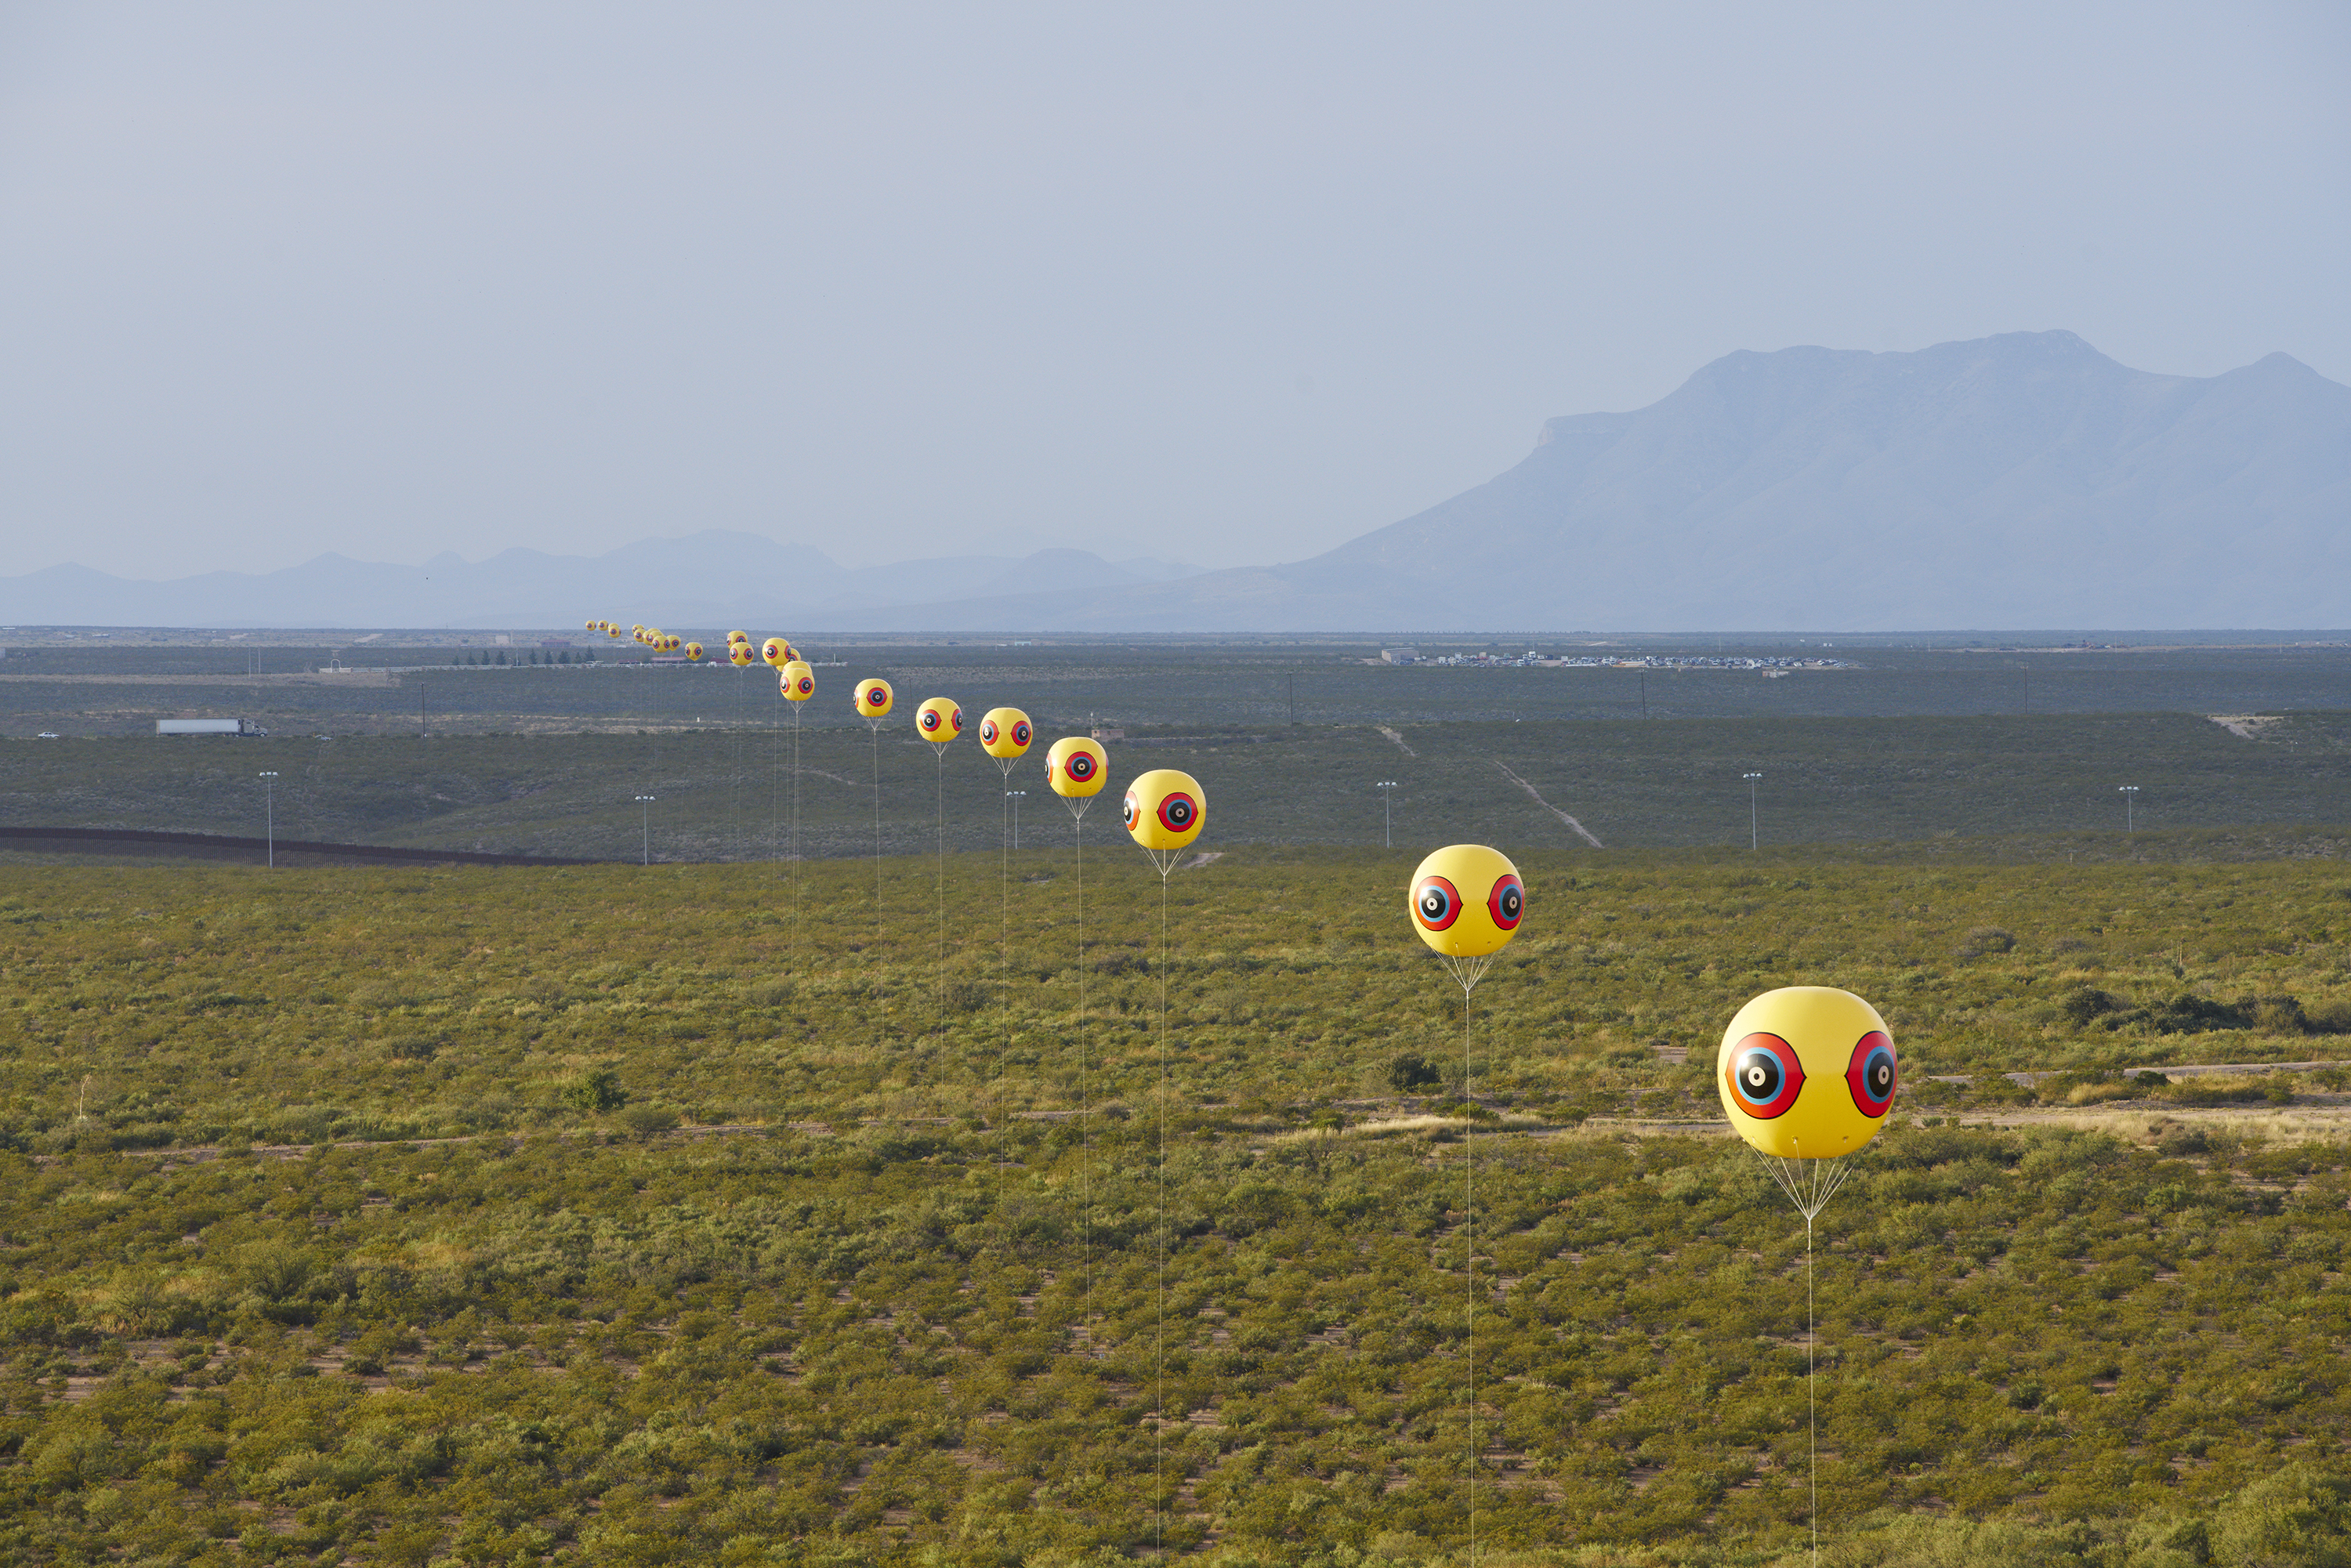 In a survey of art critics and writers about the priorities and pressures of their work, the art collective Postcommodity was mentioned by survey respondents when asked to name artists they believed were worthy of championing. Shown here is a view of Postcommodity’s “Repellent Fence,” (“Valla Repelente”), which was installed across the U.S./Mexico border in 2015 near Douglas, Arizona